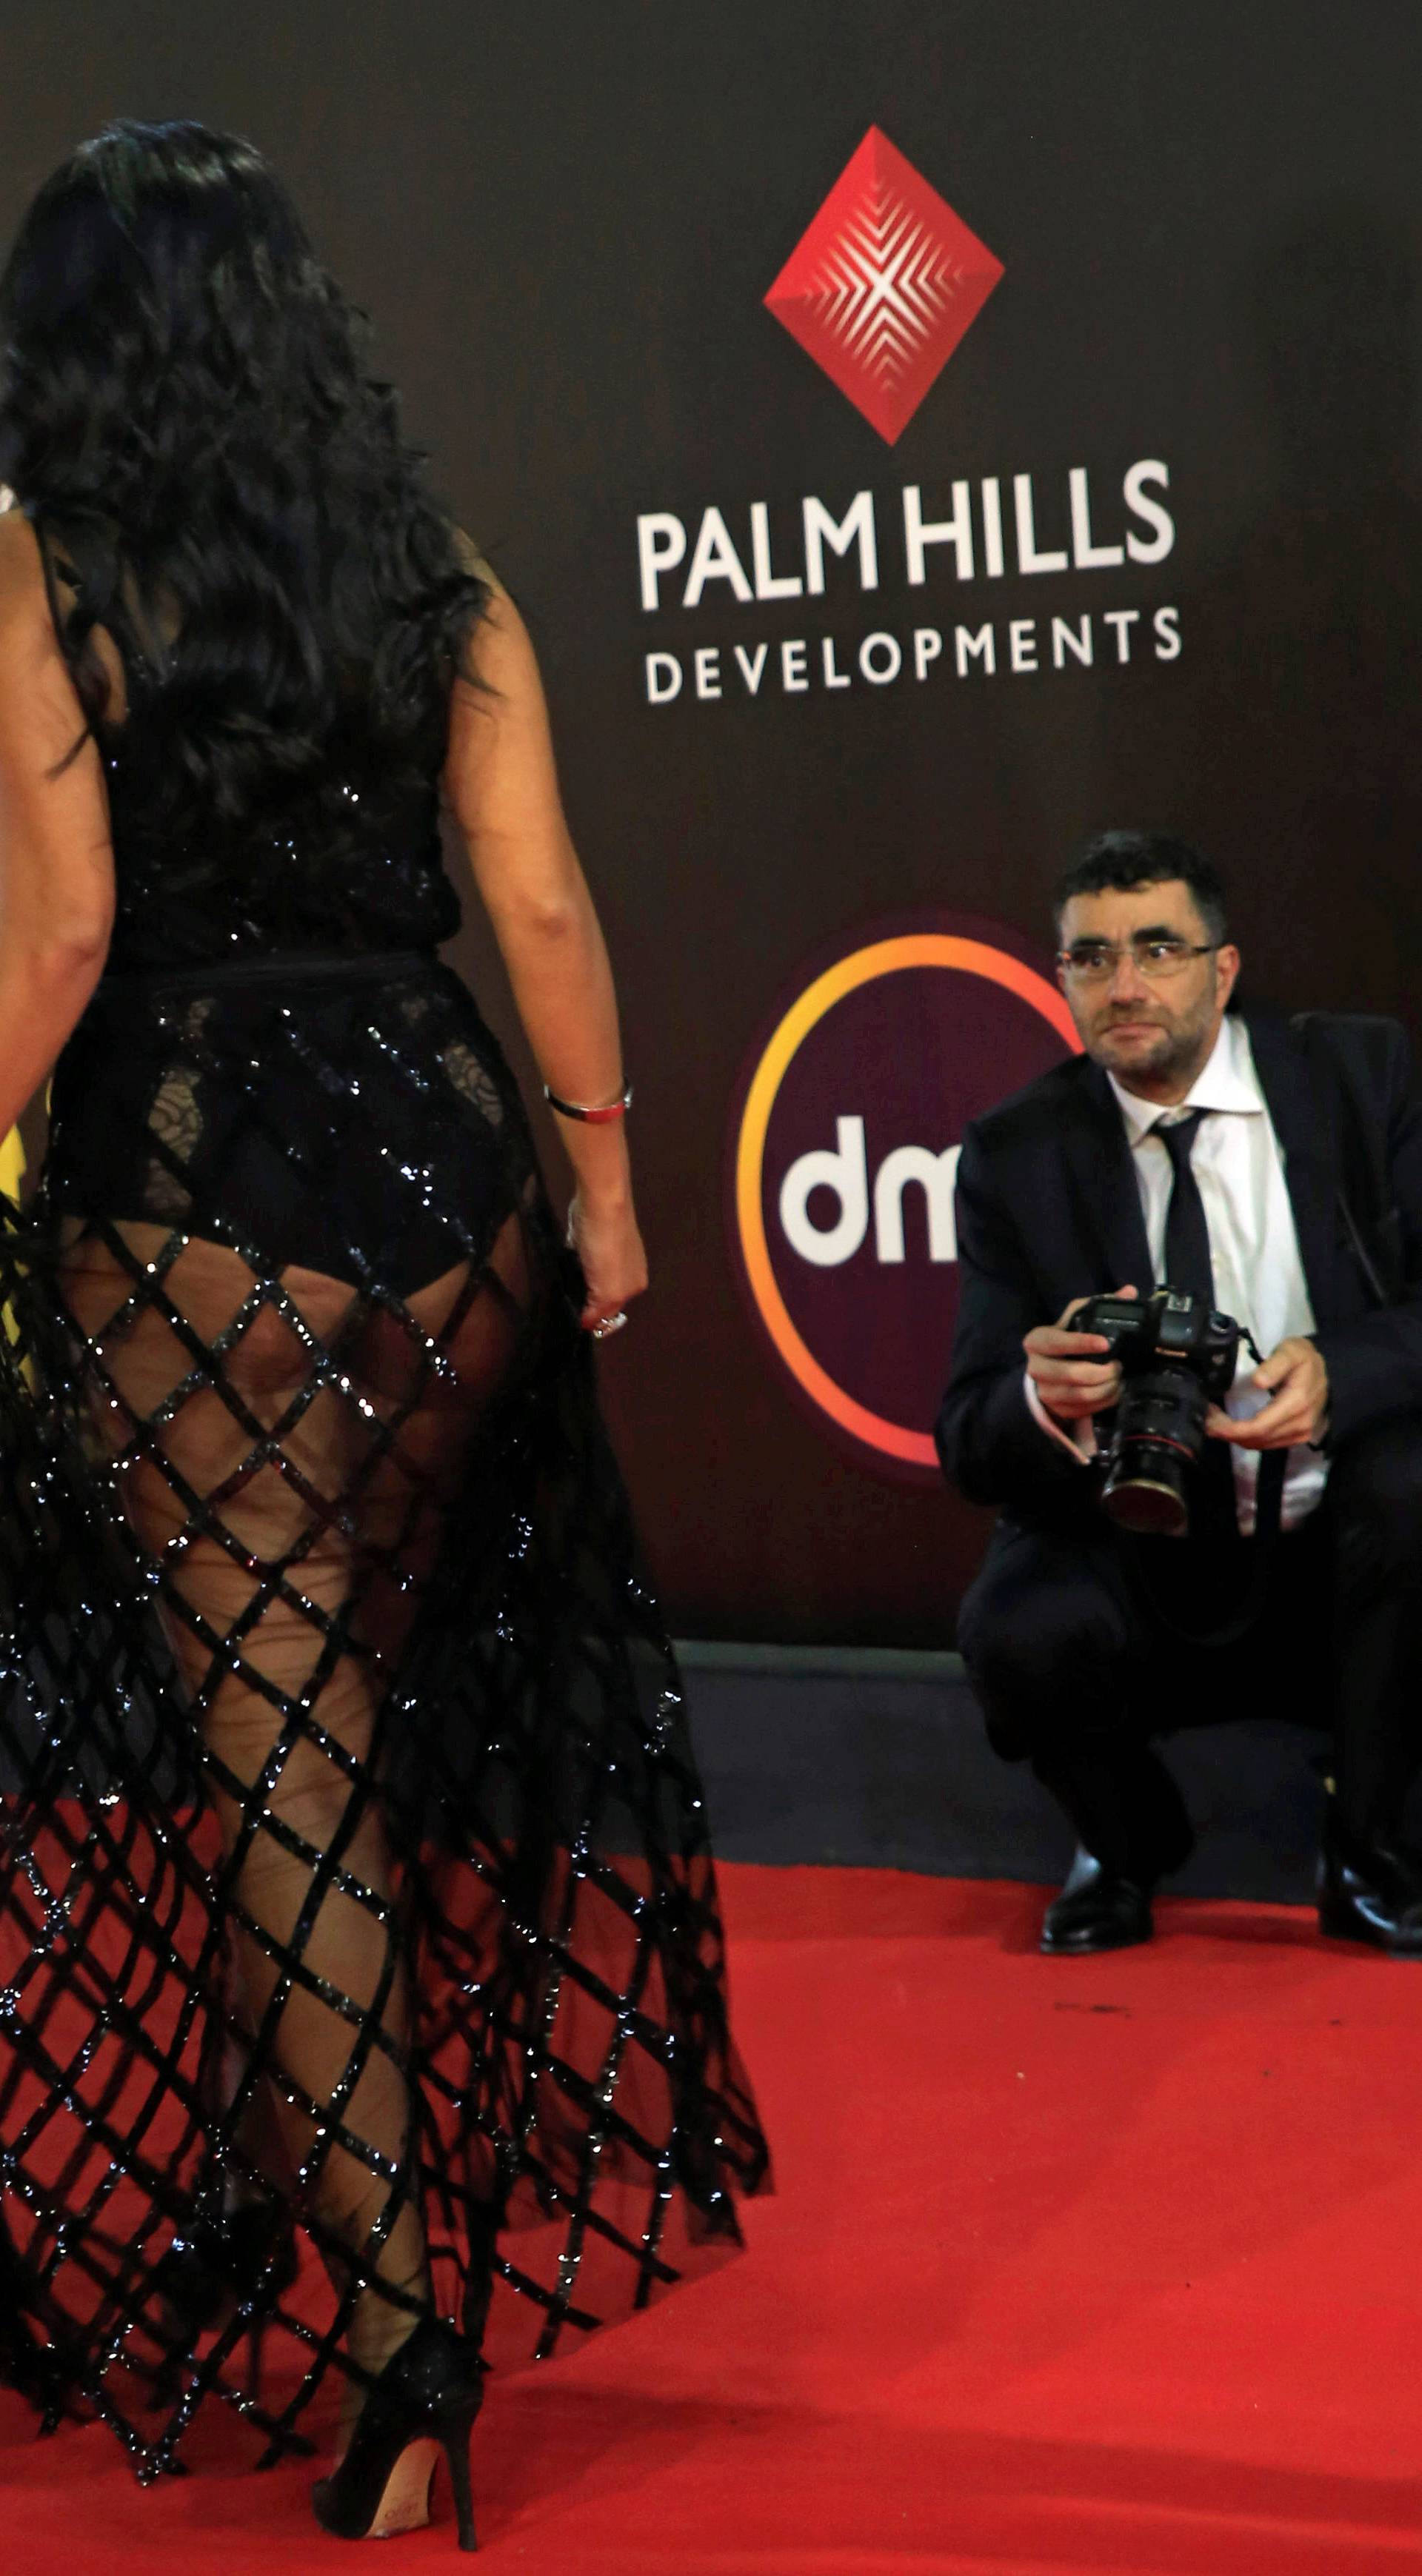 Egyptian actor Rania Youssef attends the closing ceremony of CIFF in Cairo